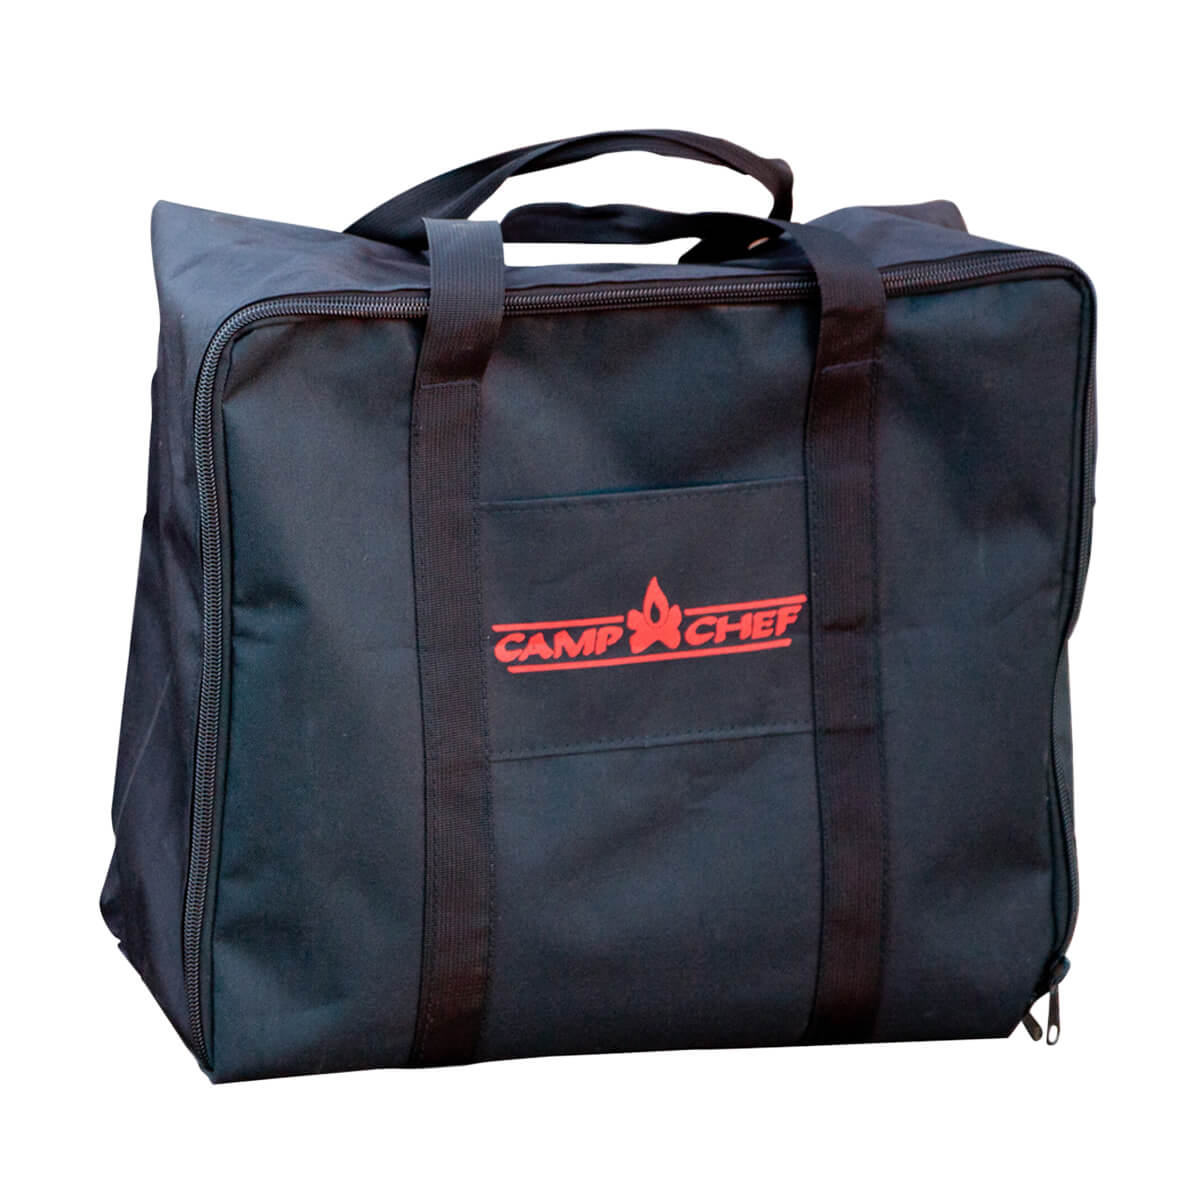 Camp Chef Accessory Carry Bag - 14-in x 16-in